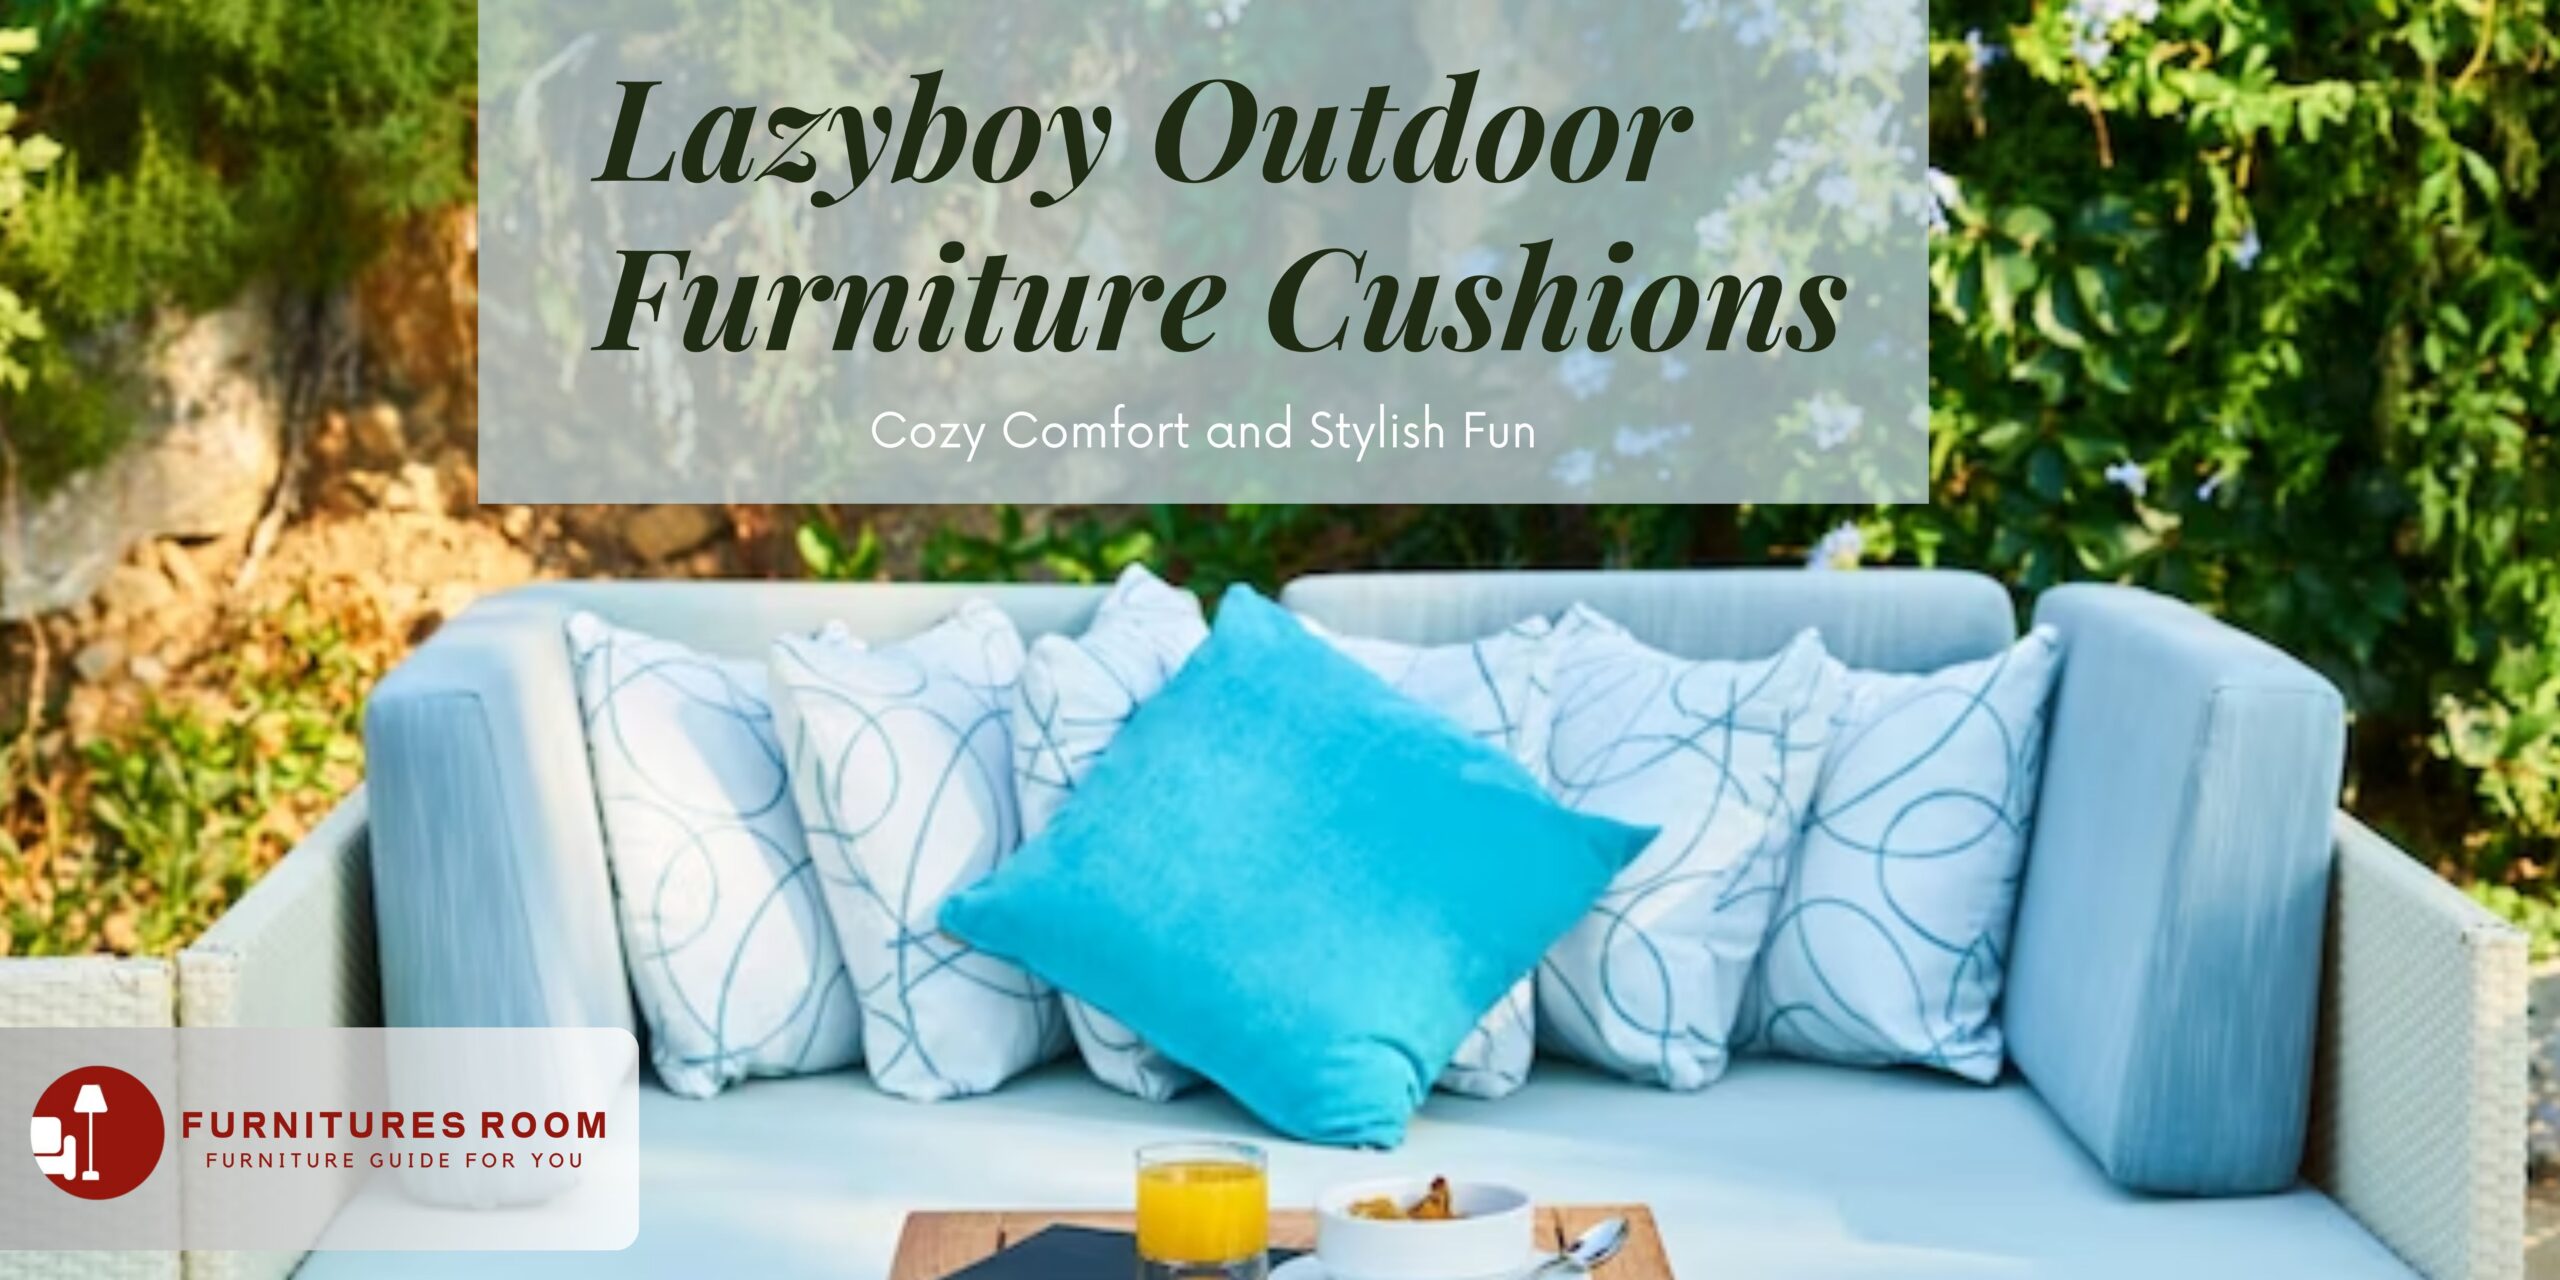 Lazyboy Outdoor Furniture Cushions